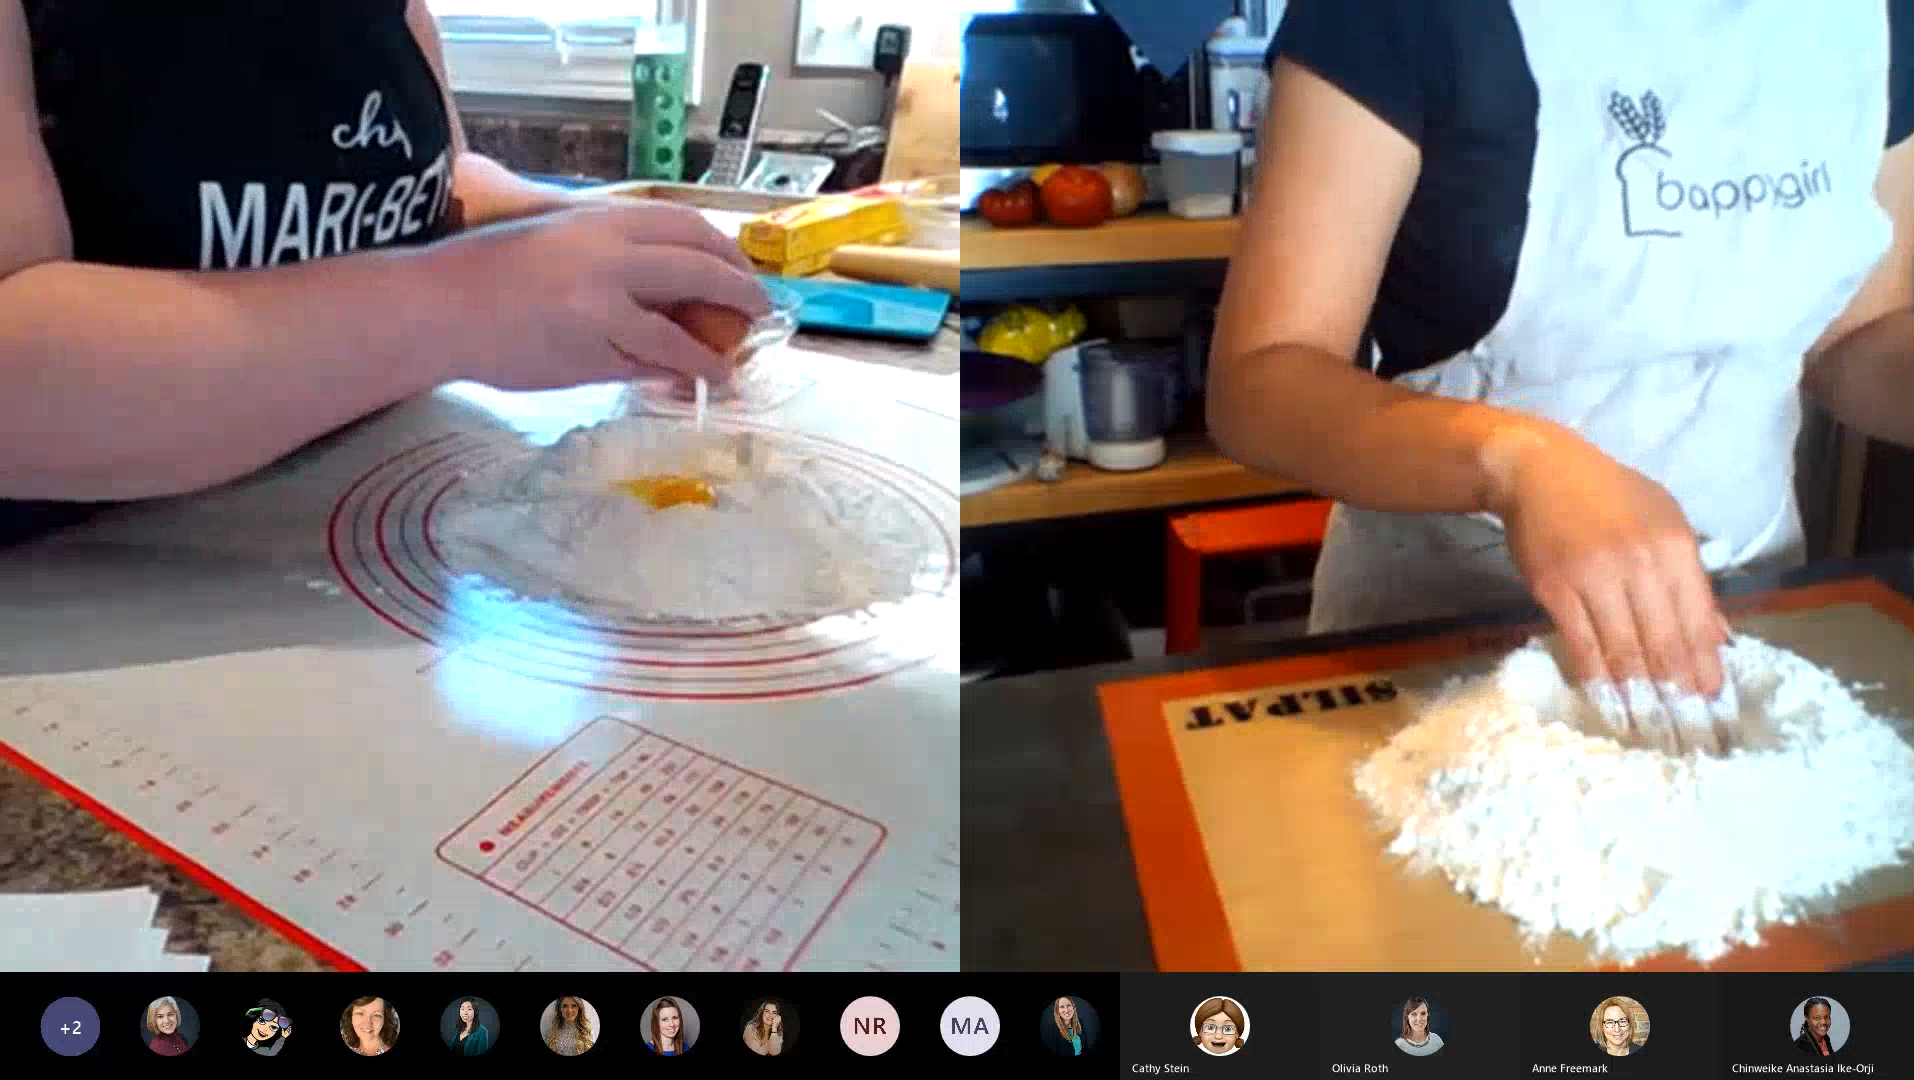 Two people on a virtual call putting an egg on flour